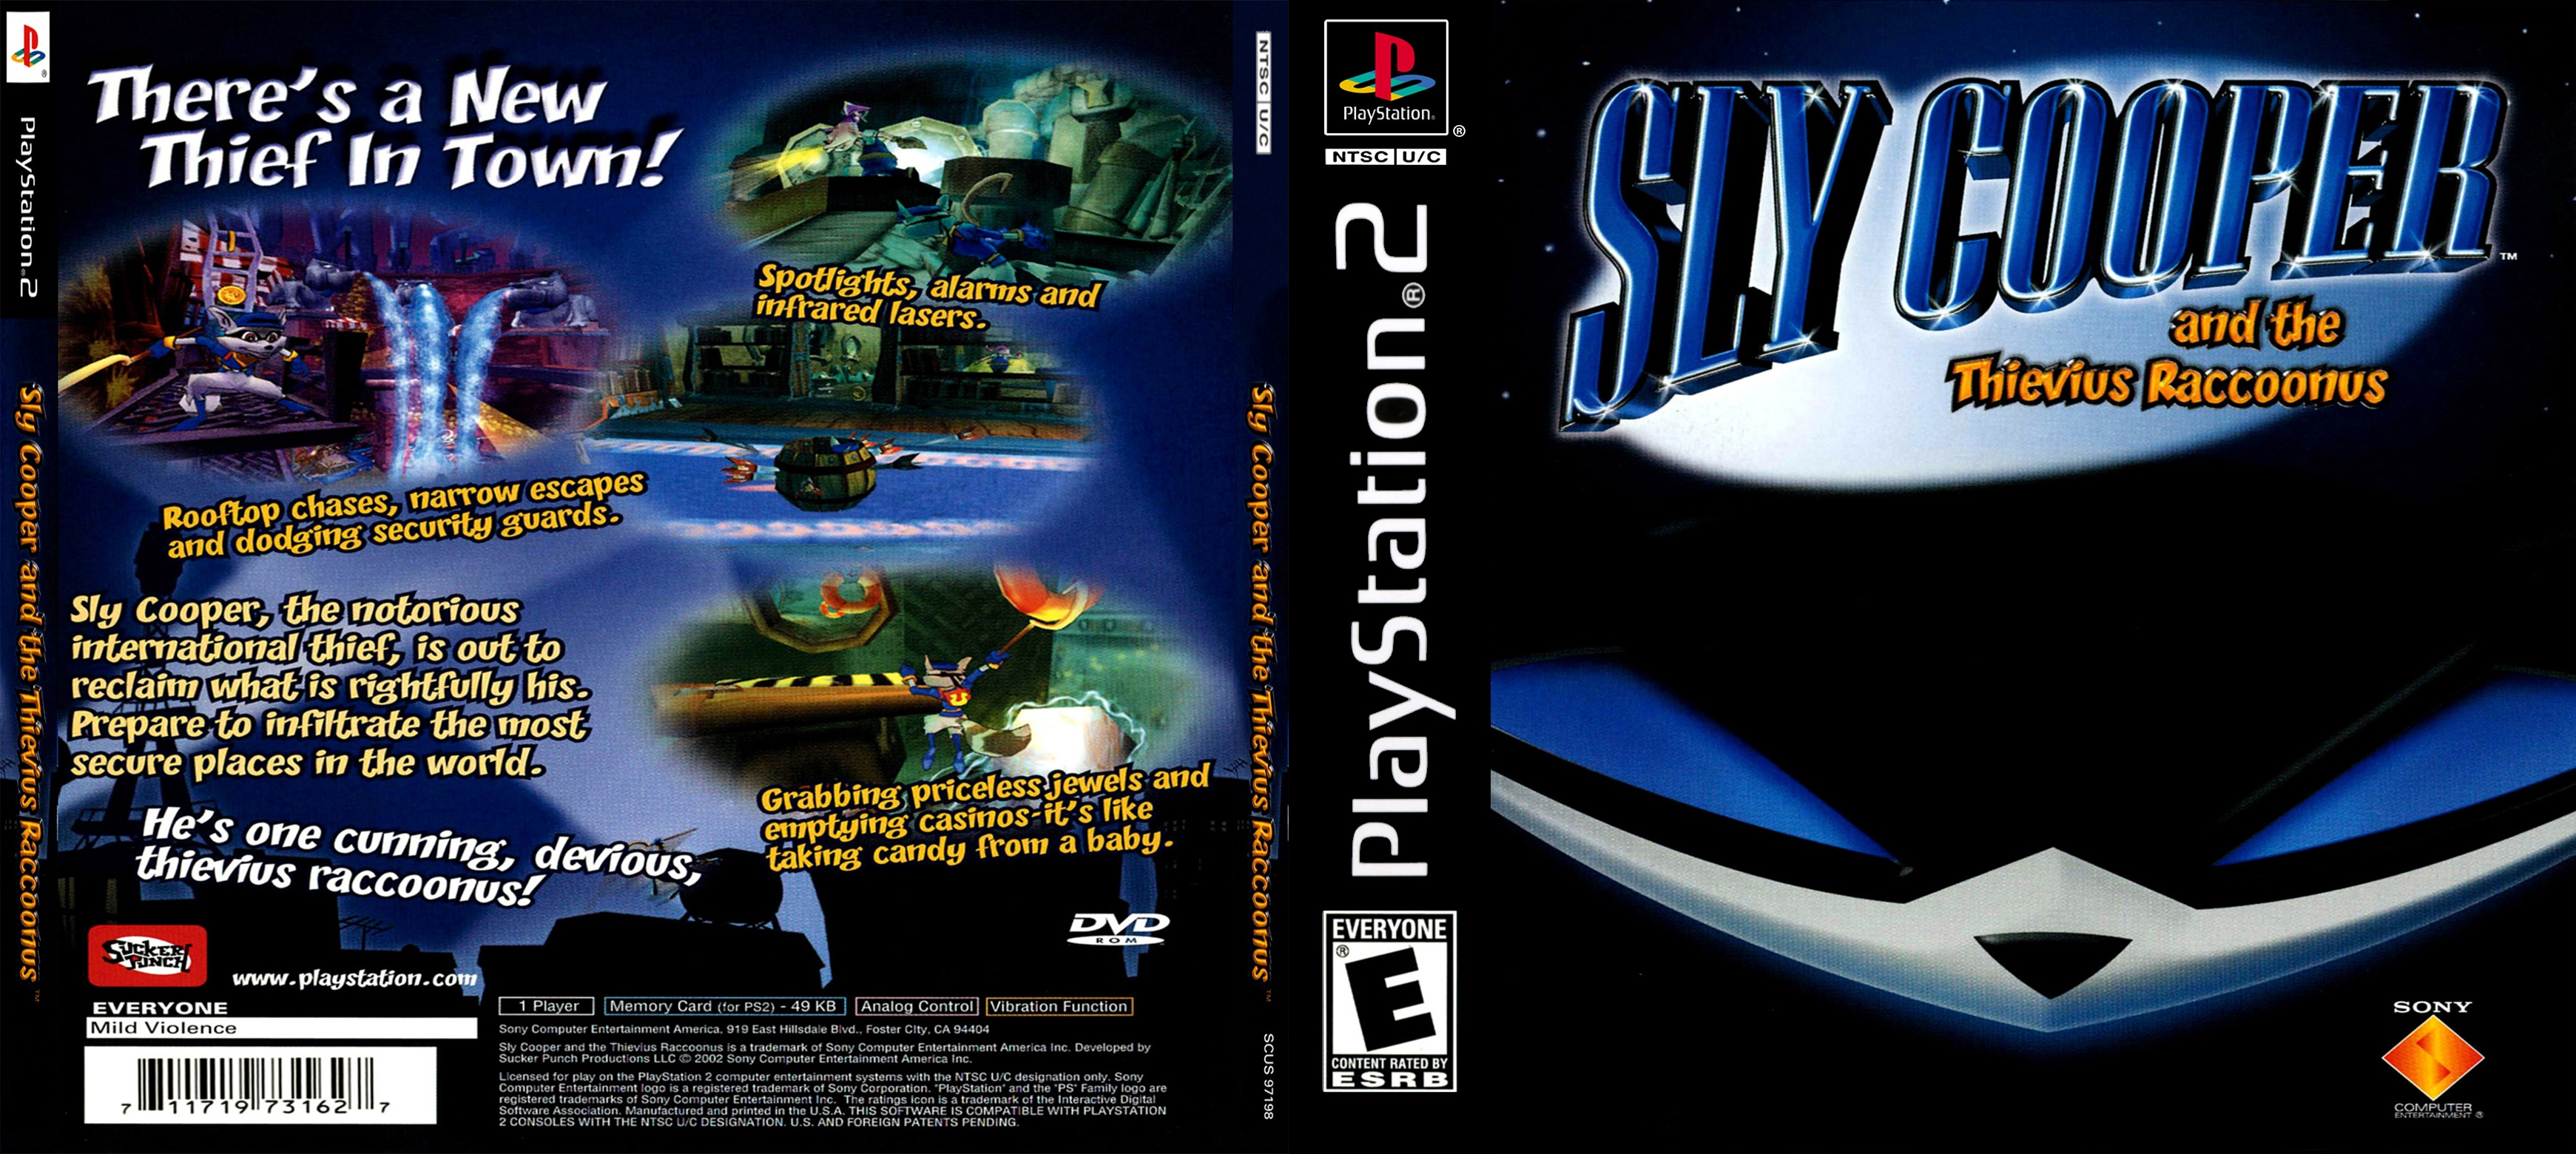 Sly Cooper PS1 Case box cover